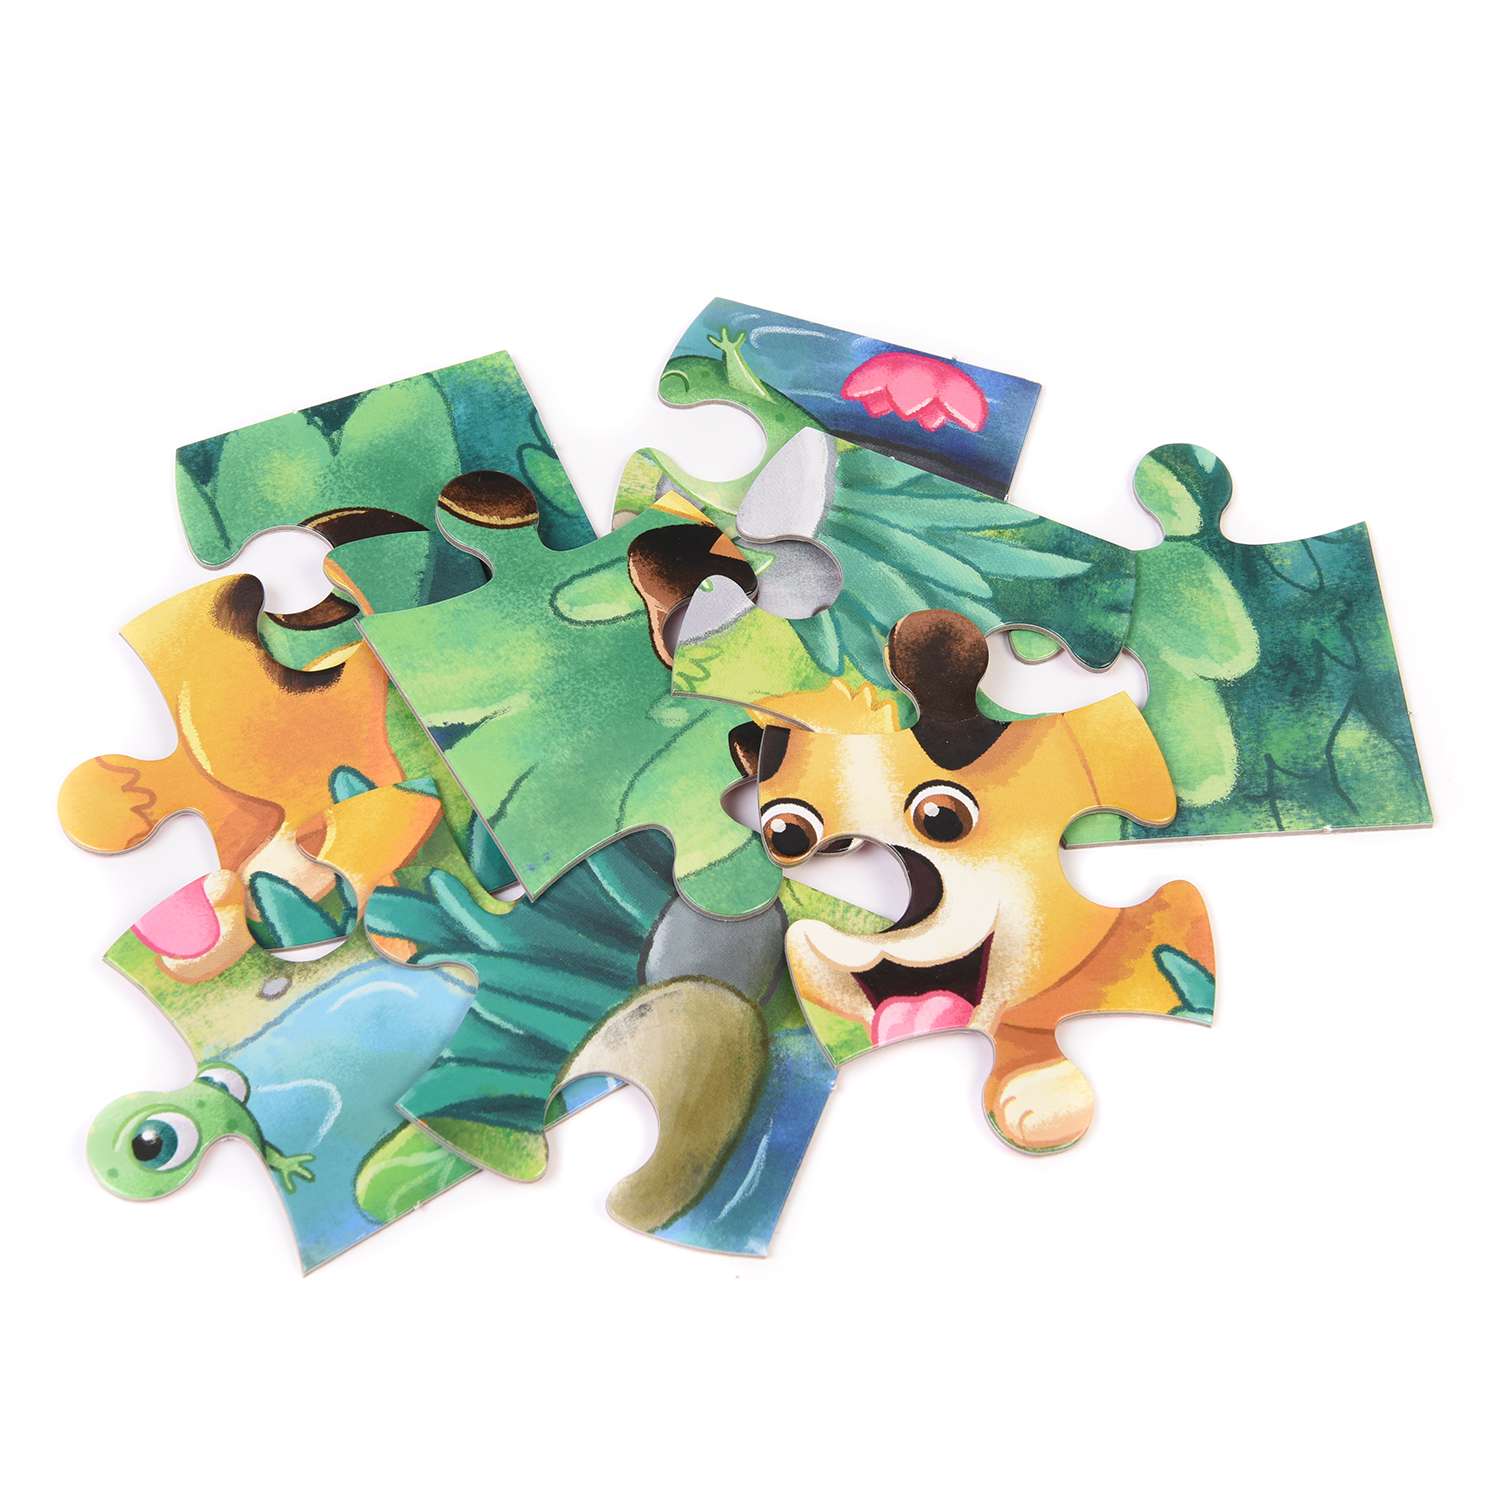 Пазл Baby Toys First Puzzle Щенок 9элементов 04147 - фото 3